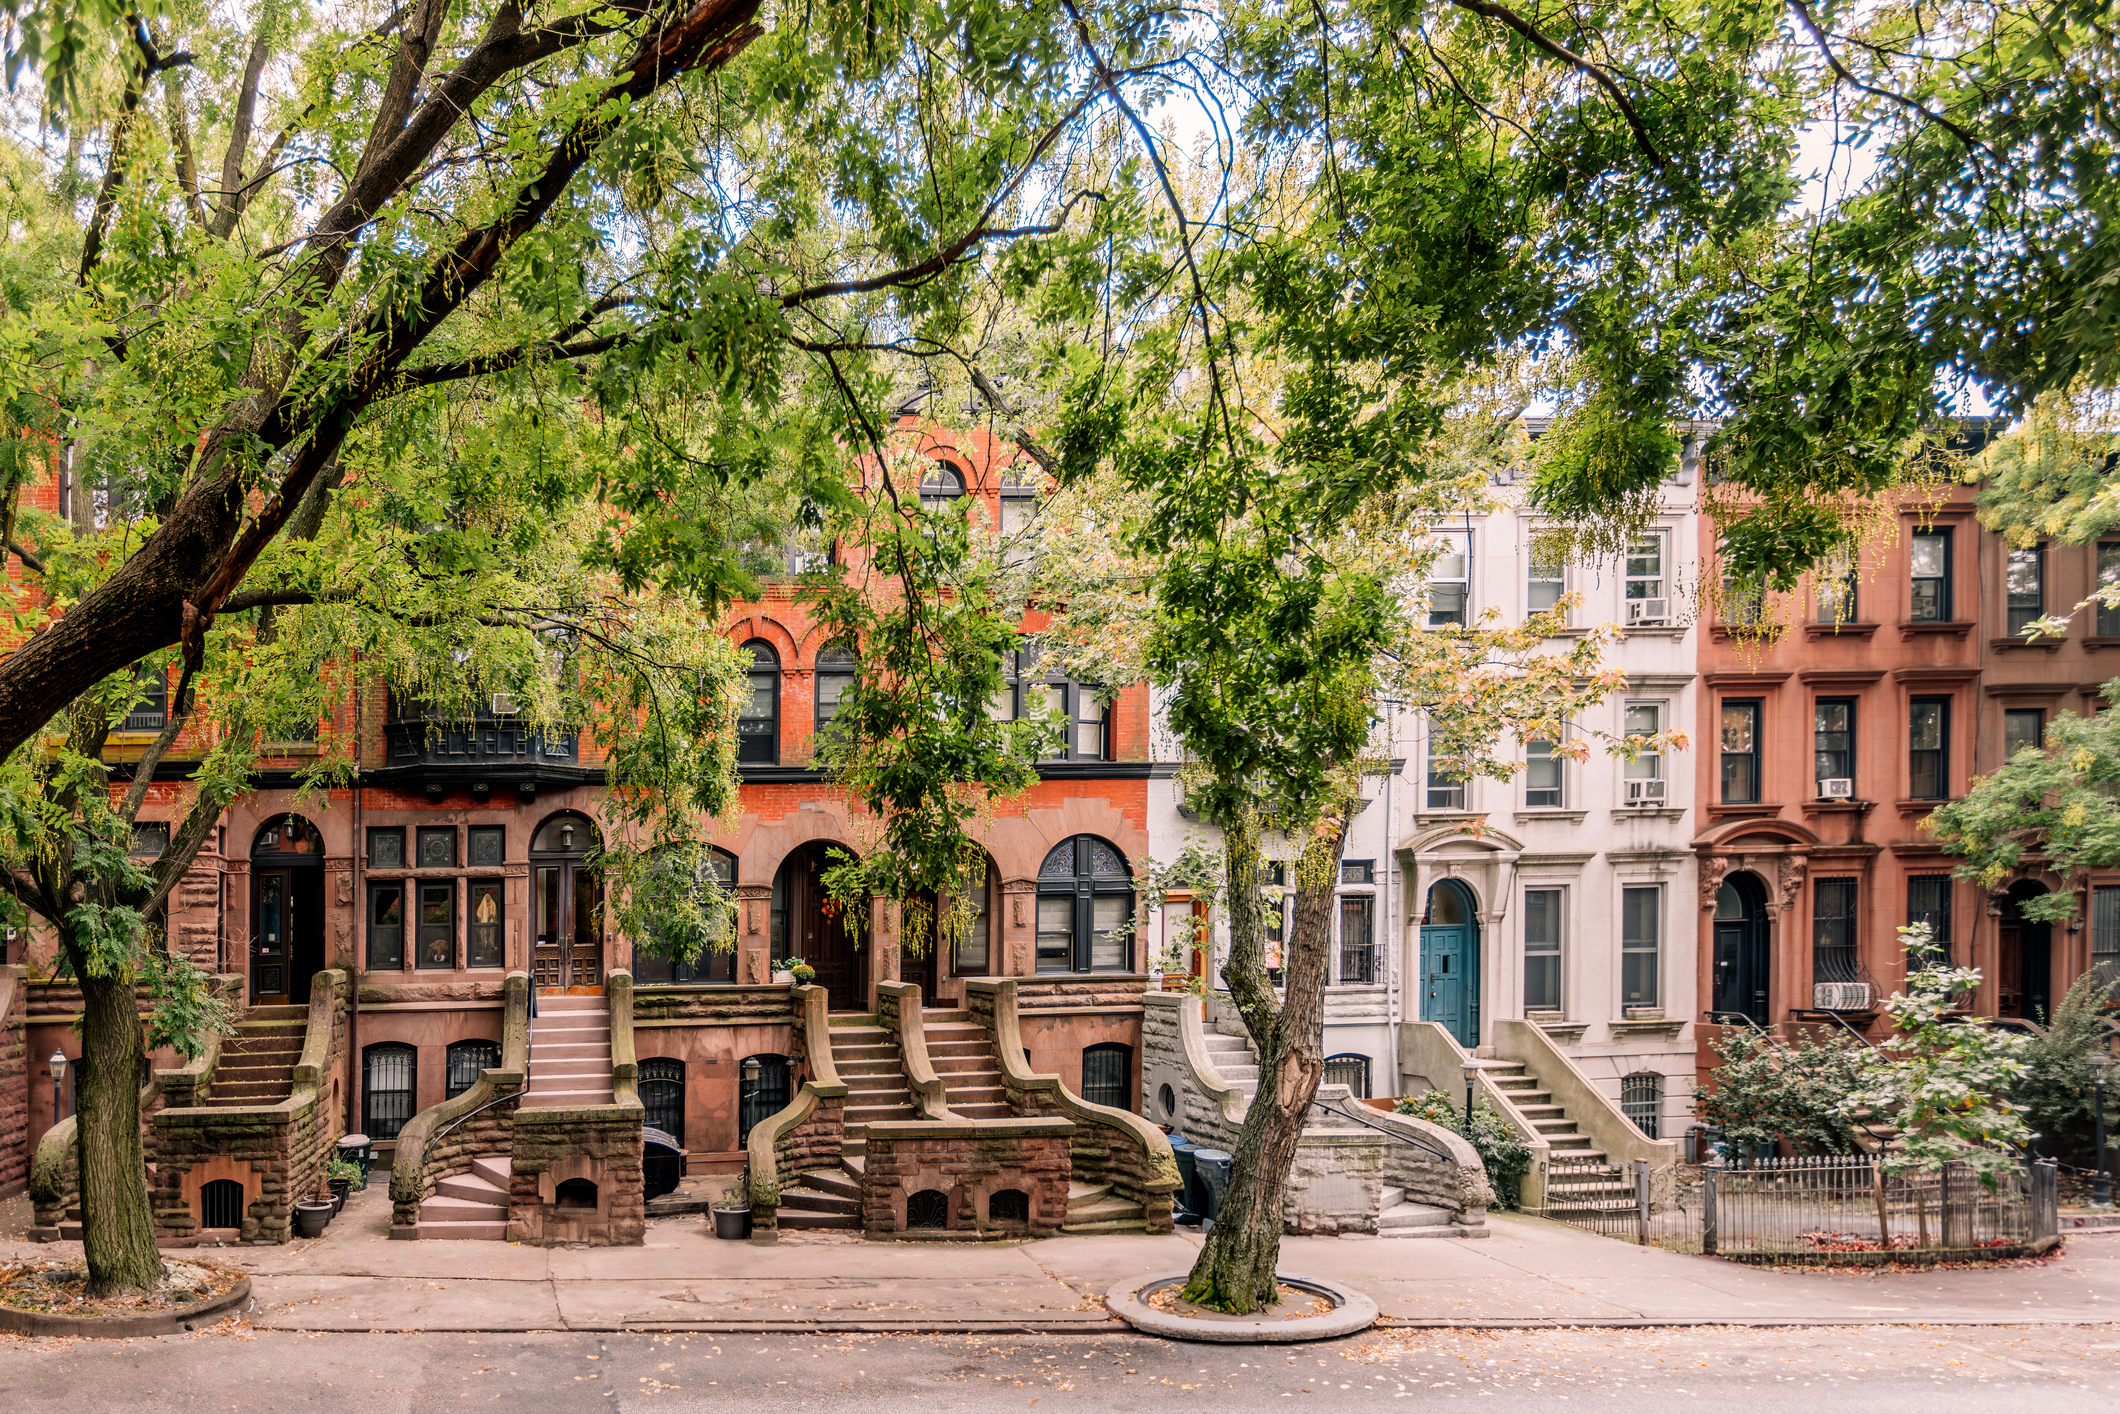 Row of brownstone stairs leading to townhouses with trees in front